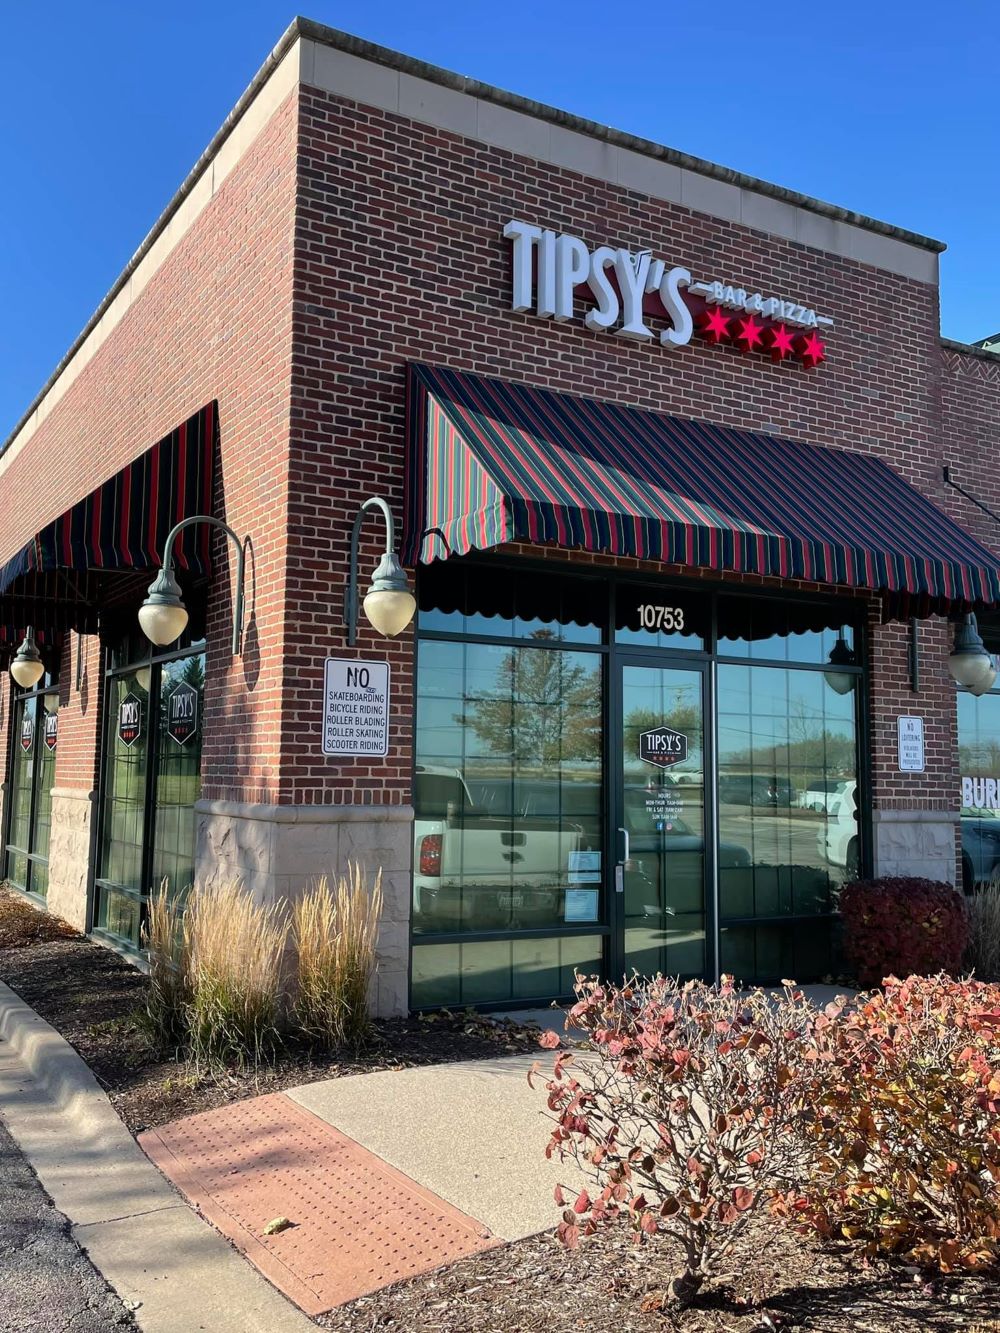 Tipsy's Bar and Pizza faced the Liquor Commission on April 22 for noise complaints and other alleged violations